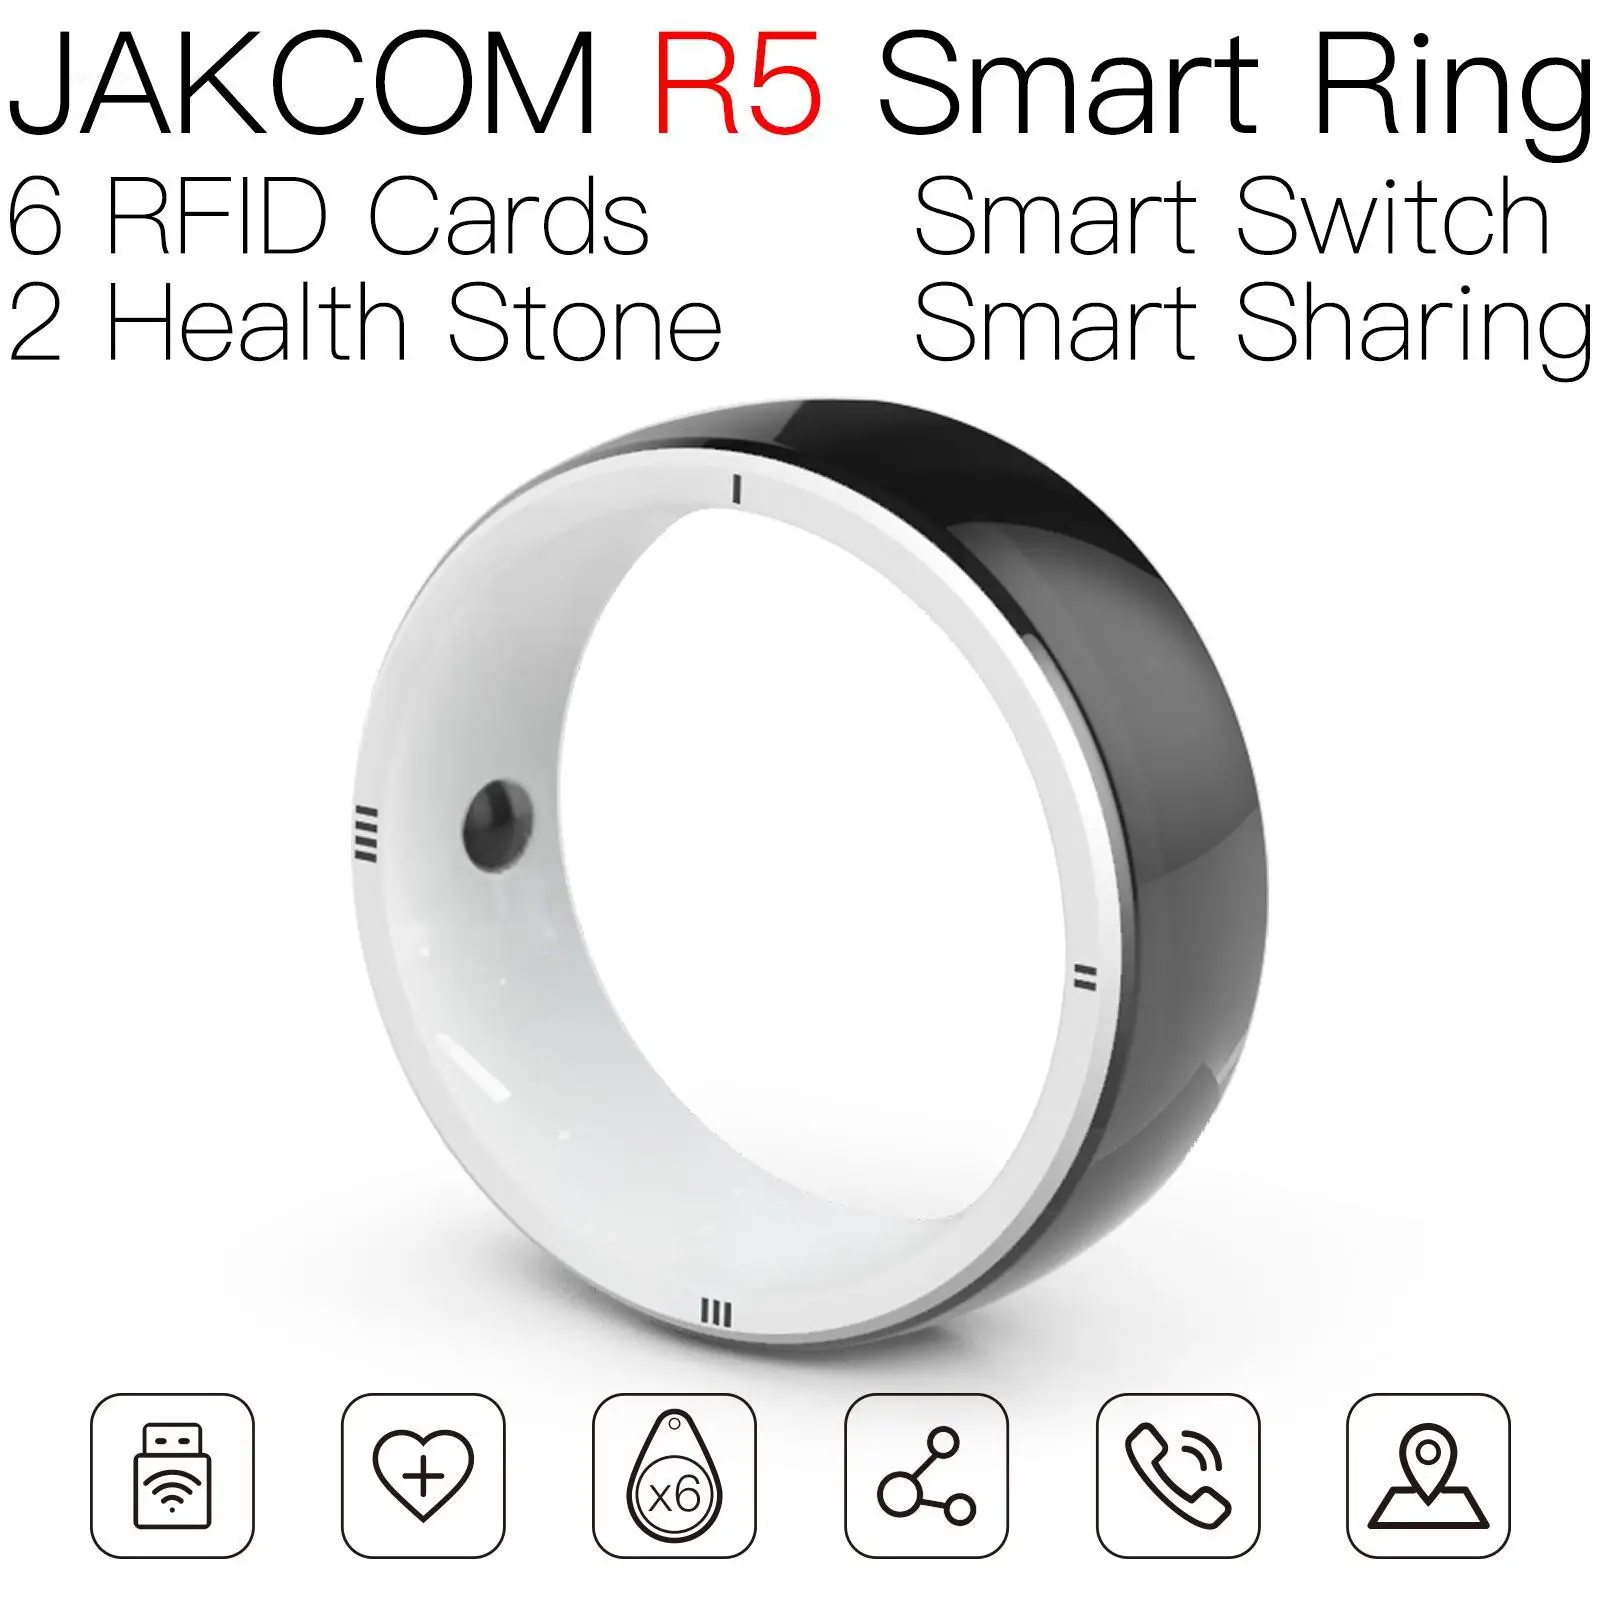 JAKCOM R5 Smart Ring Match to d18 smart watch electric drill new user dt98 lover watches 8 ultra gtr lite android mobile